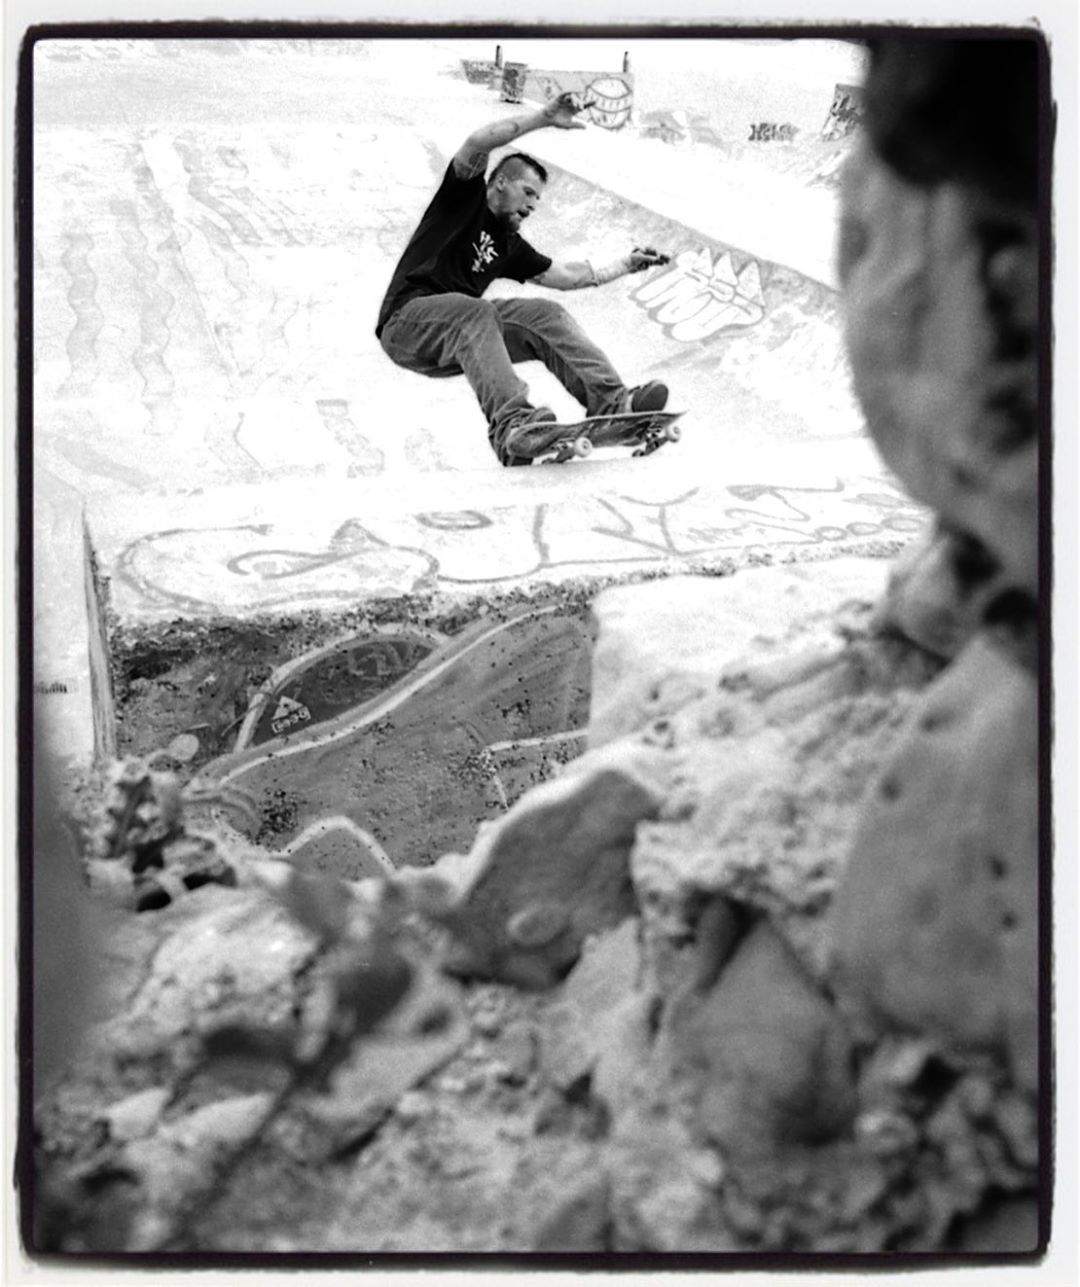 Matt Grabowski grinding the La Kantera 1/4 pipe, 2004. Looking forward to skate La Kantera with everybody in a few hours